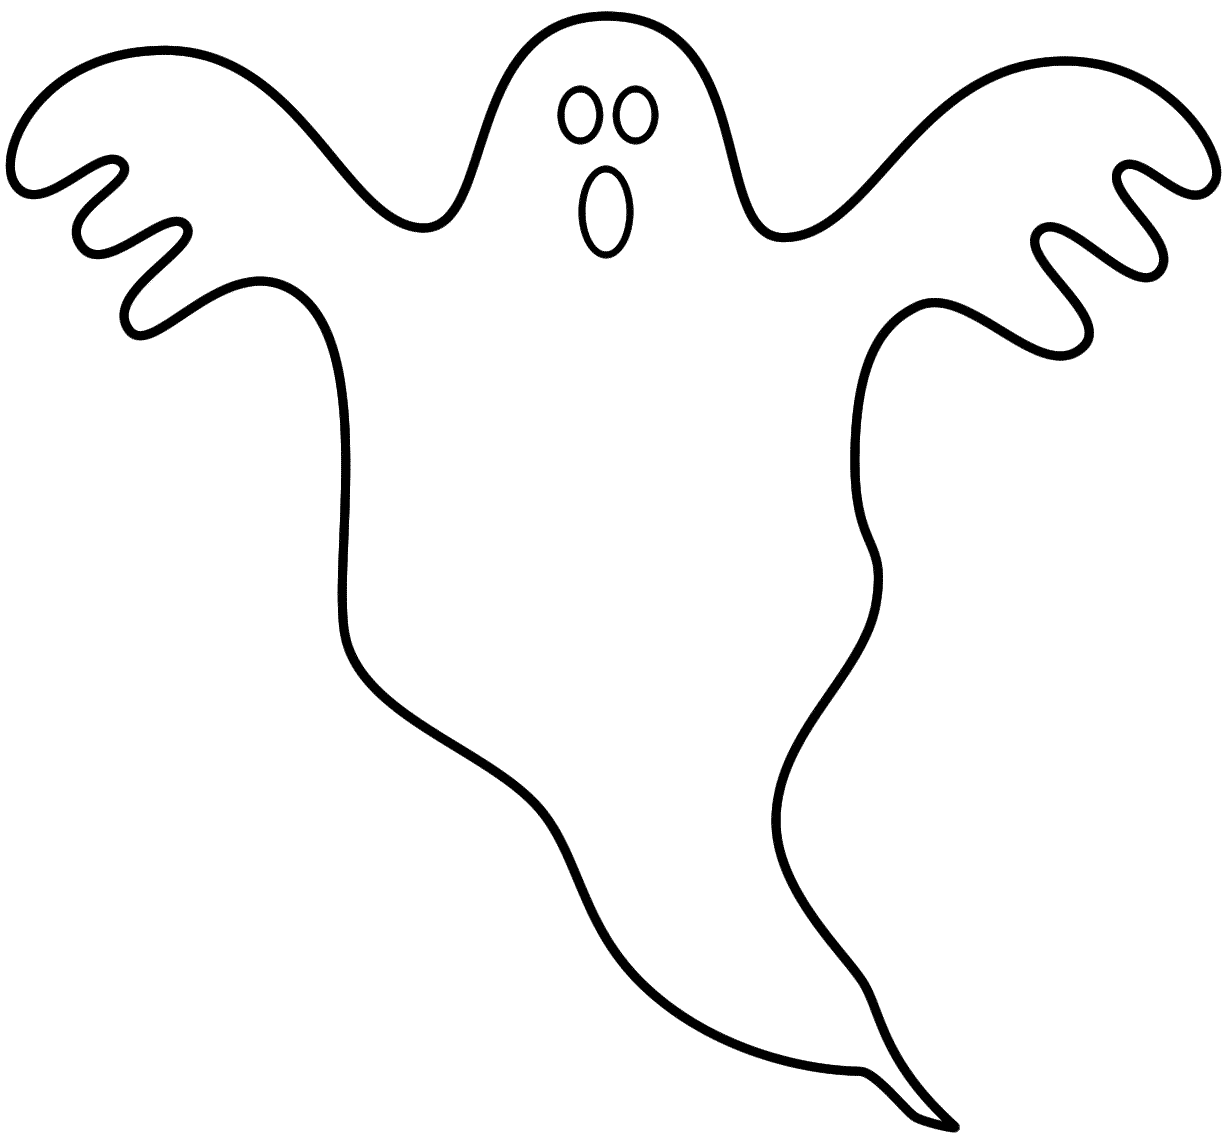 Ghost Printable. Halloween coloring, Coloring pages, Halloween wallpaper